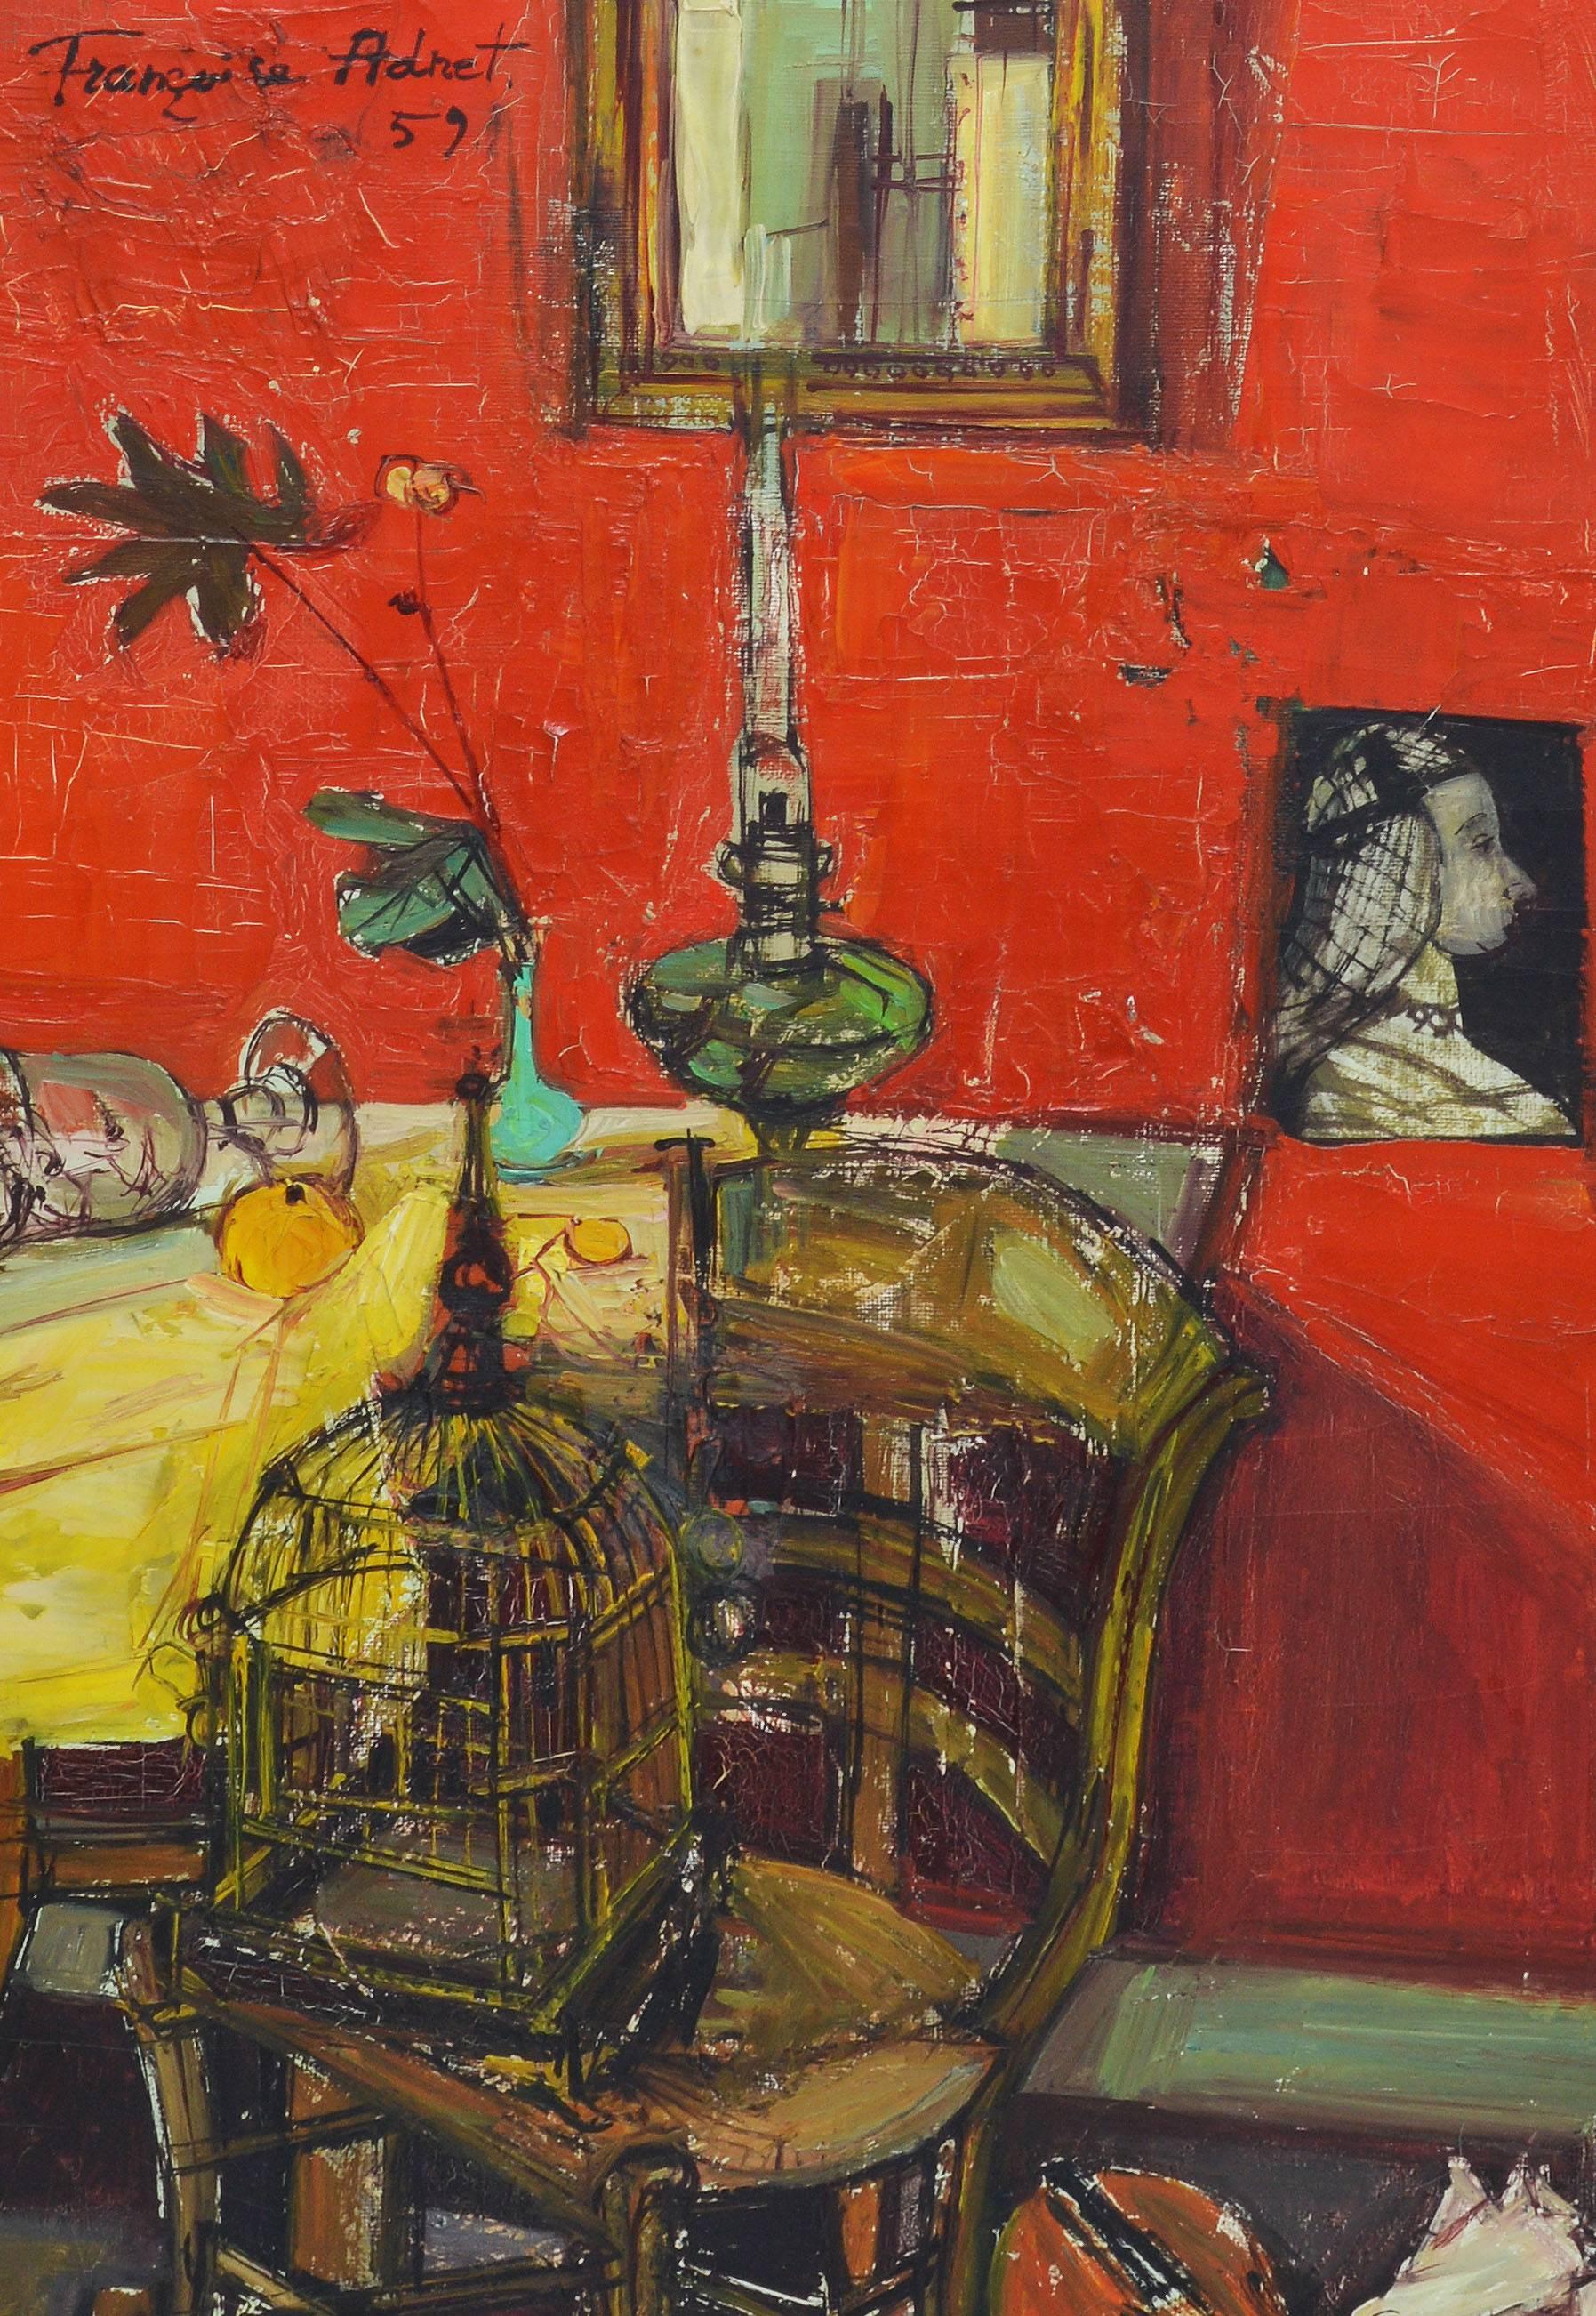 Modernist interior view by Françoise Adnet  (born 1924).  Oil on canvas, circa 1959.  Signed.  Displayed in a period modernist frame.  Image size, 13